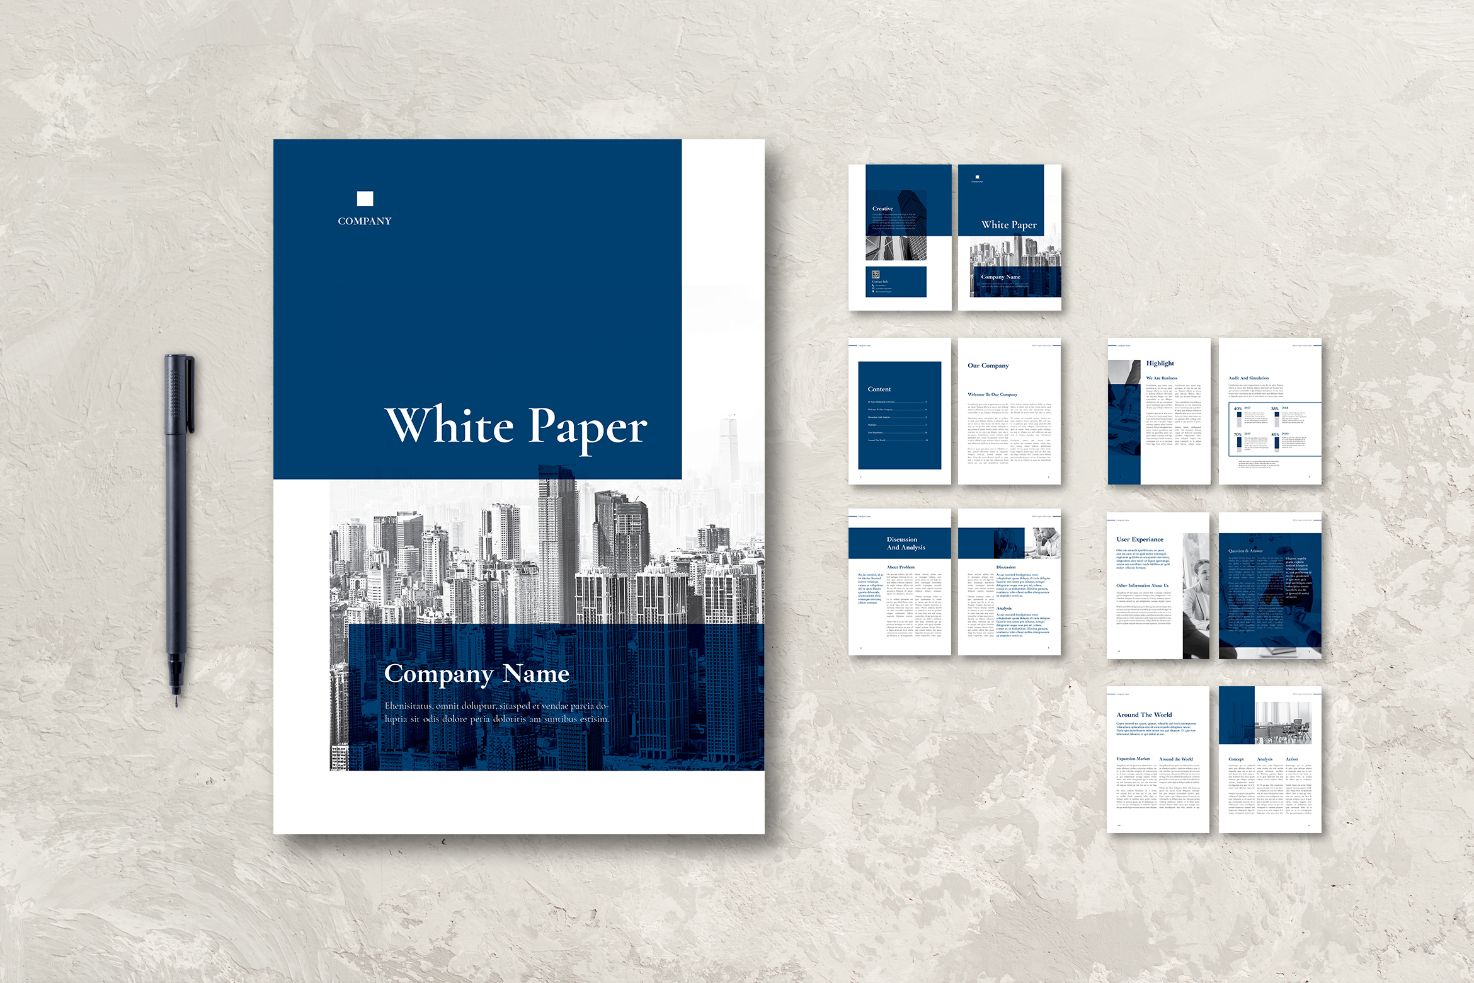 Whitepaper Report - Blue and White Theme with Transparency